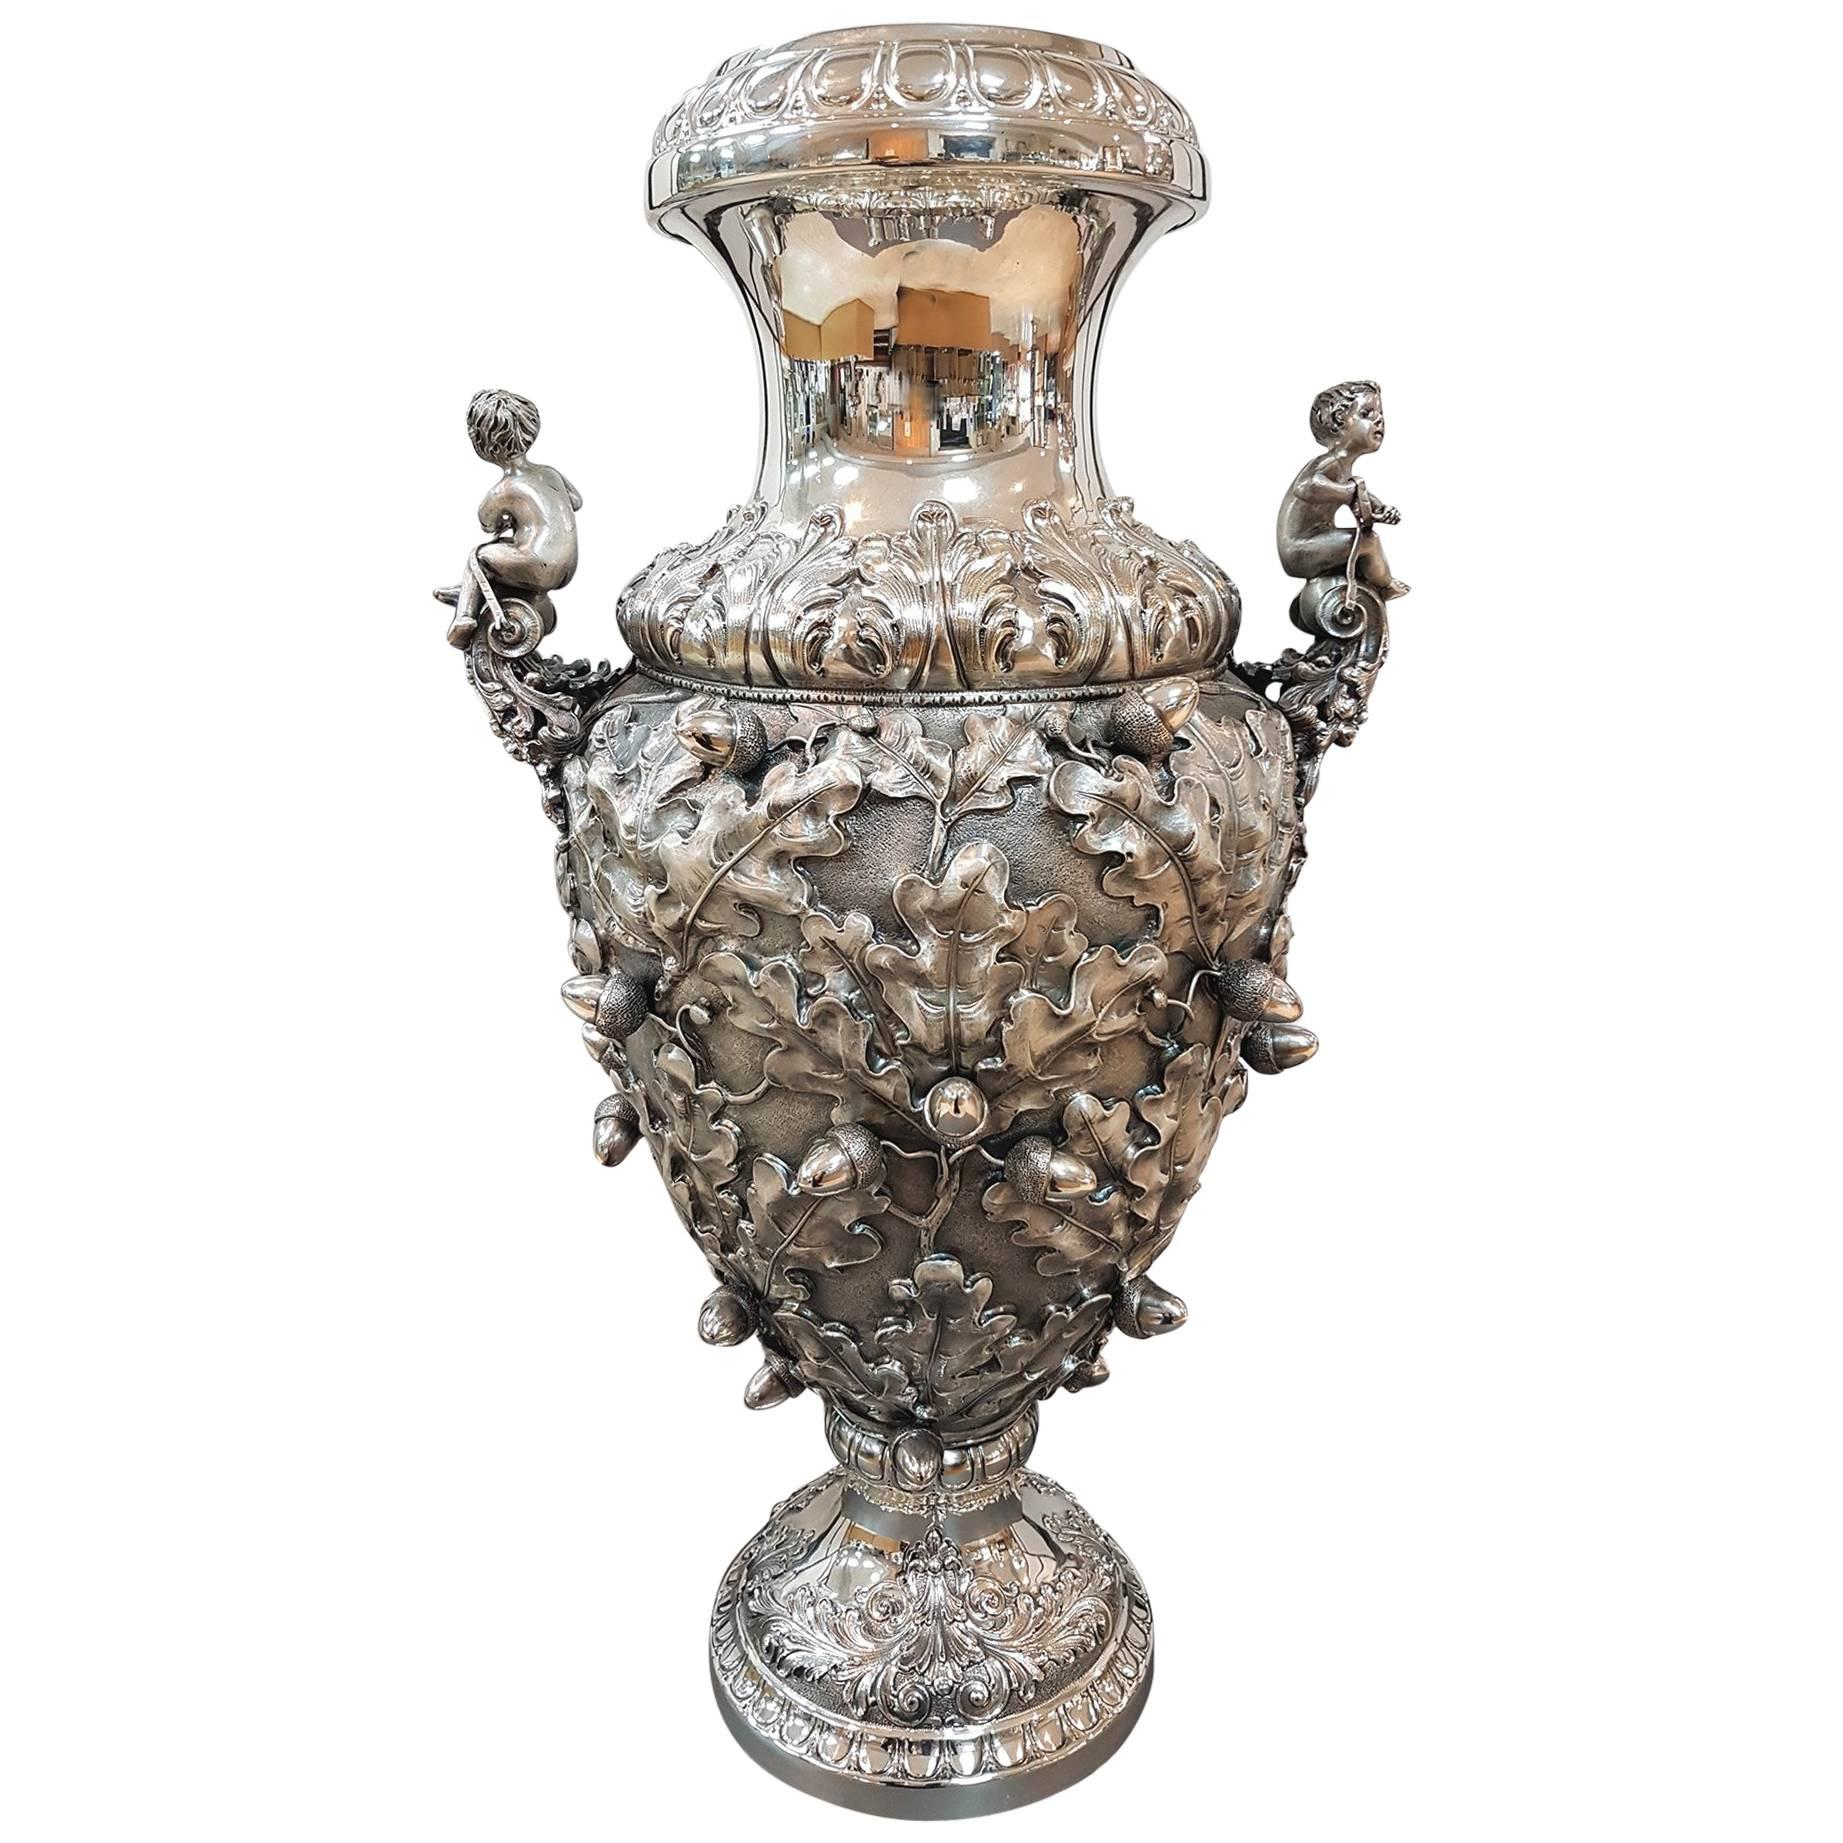 20th Century Italian Silver Oak Leaves Vase. Chiselled, embossed and burnished